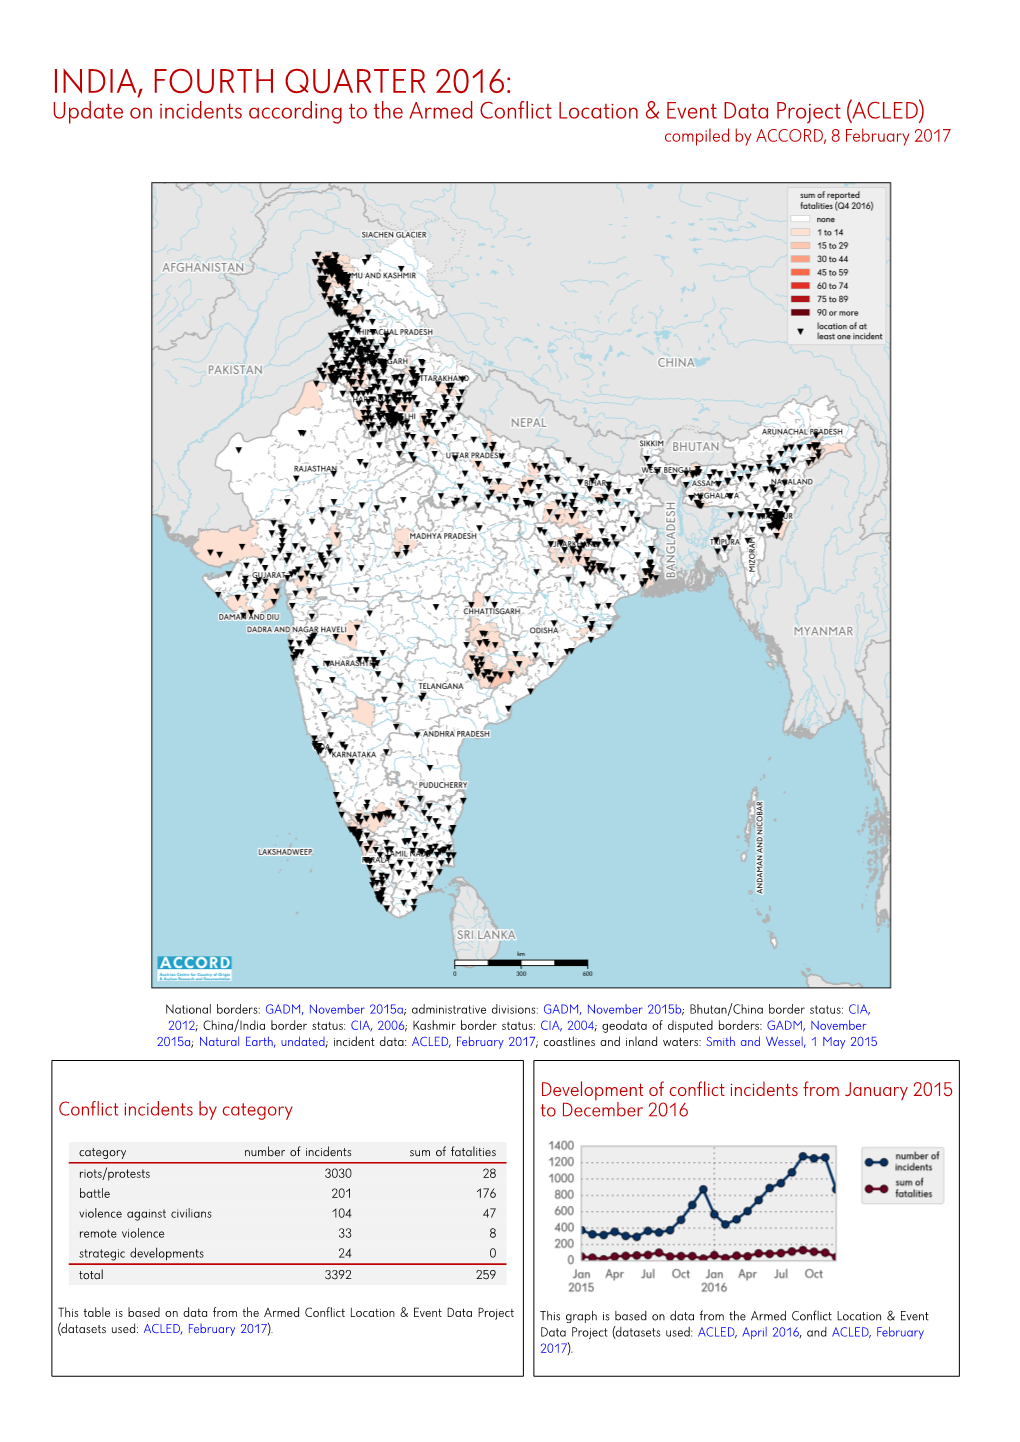 India, Fourth Quarter 2016: Update on Incidents According to the Armed Conflict Location & Event Data Project